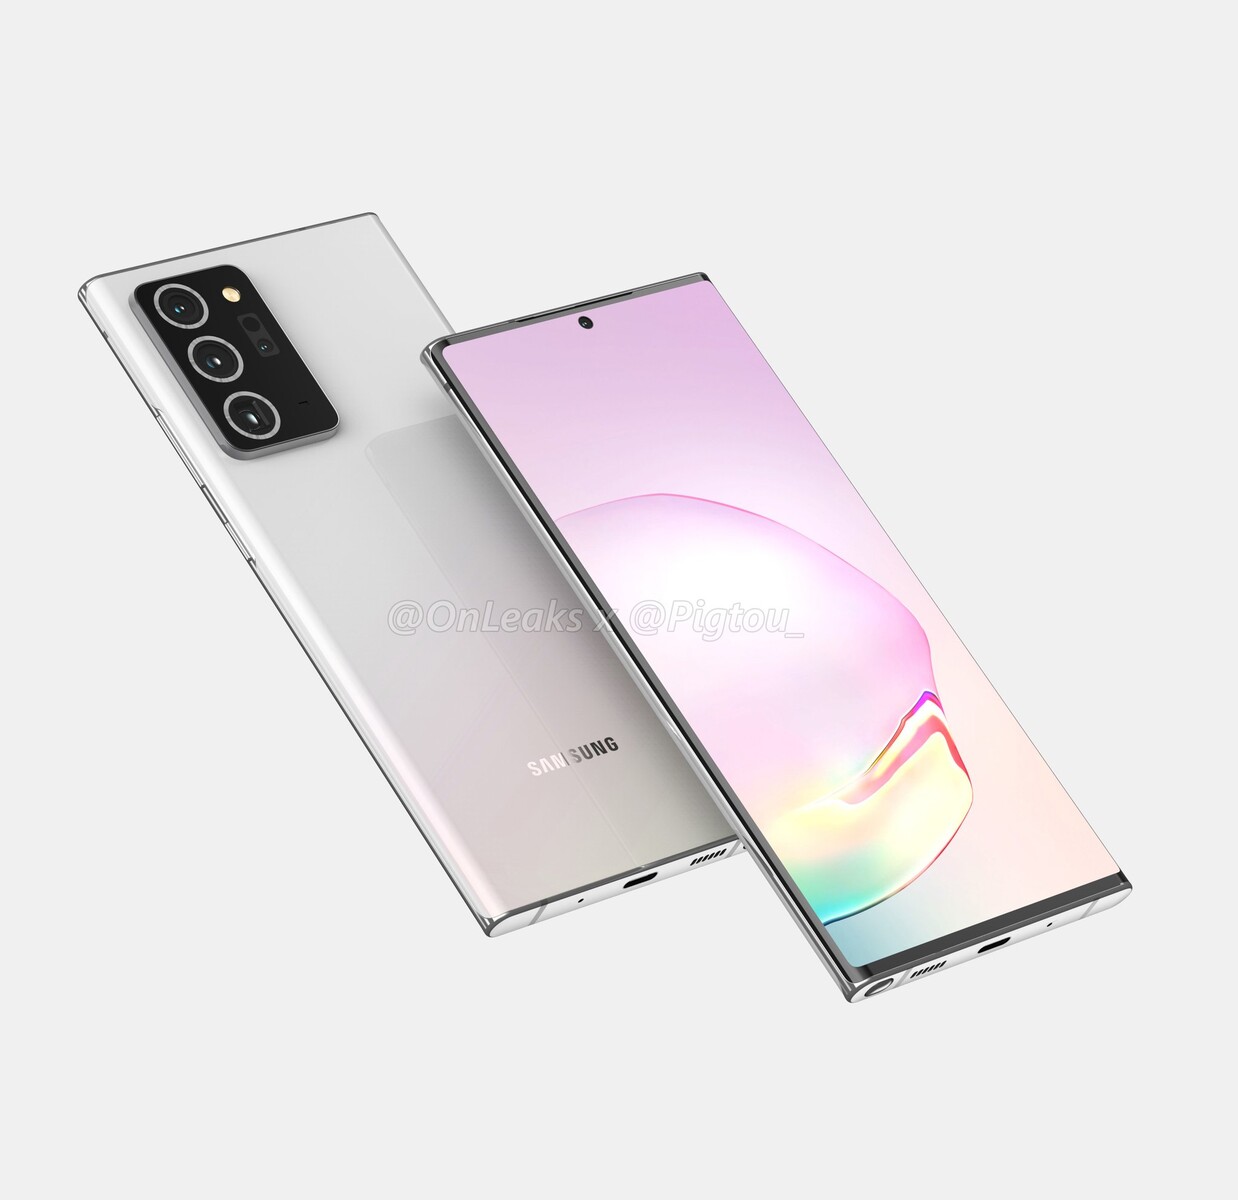 Leaked Galaxy Note 10 Pro renders show massive display, quad